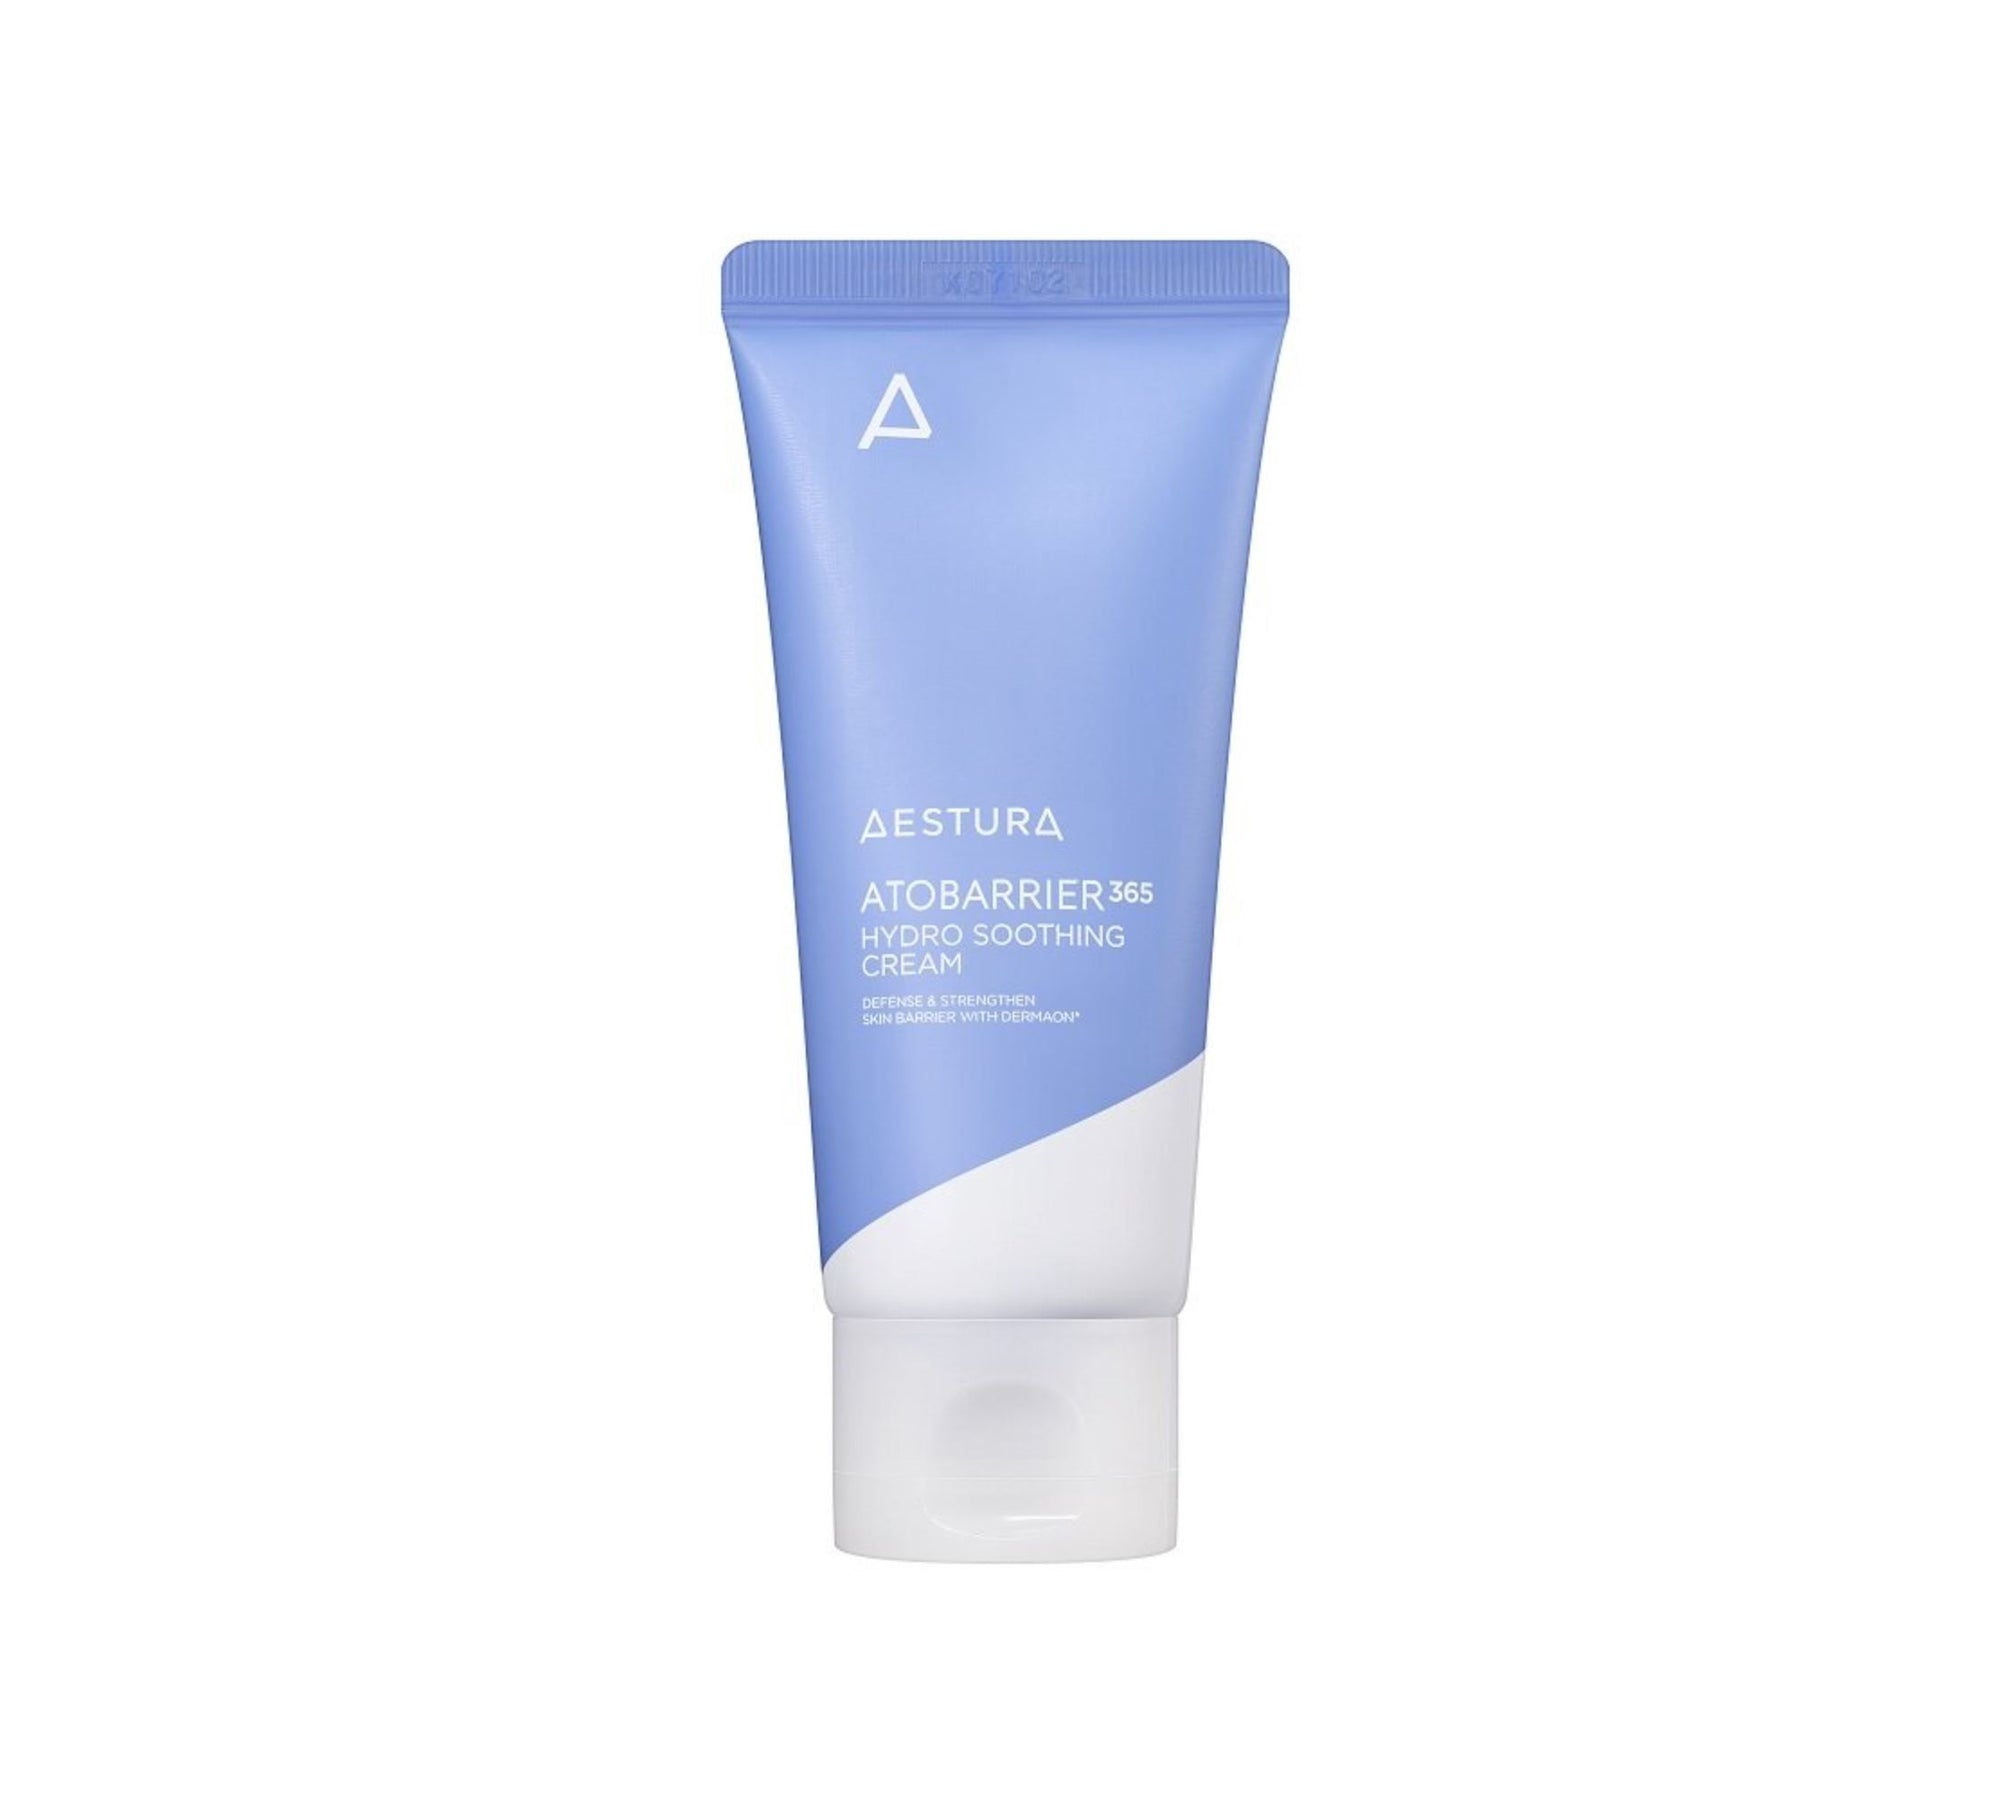 Ato Barrier 365 Hydro Soothing Cream